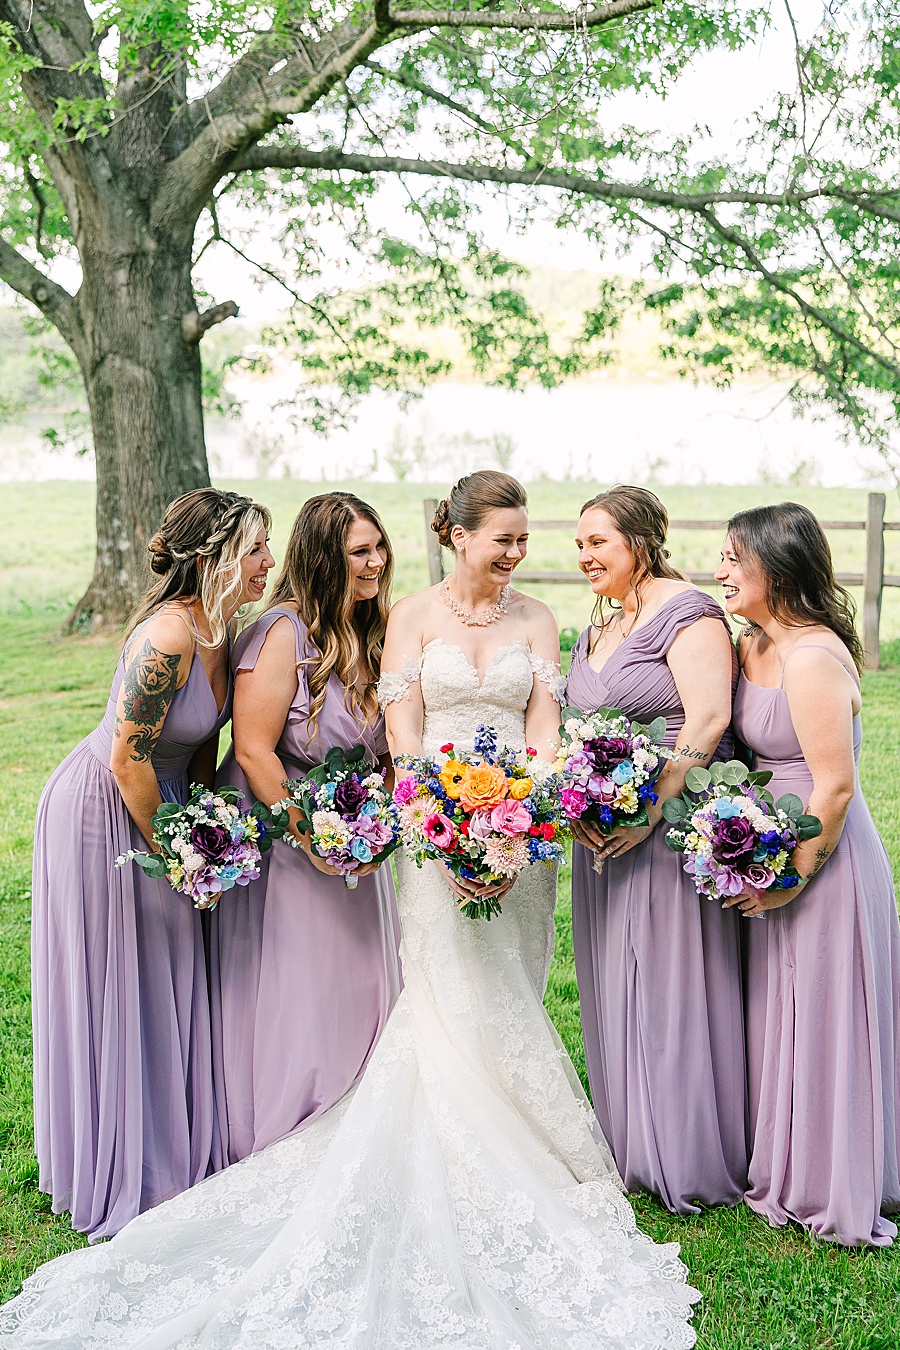 Bride and bridesmaids giggling on wedding day